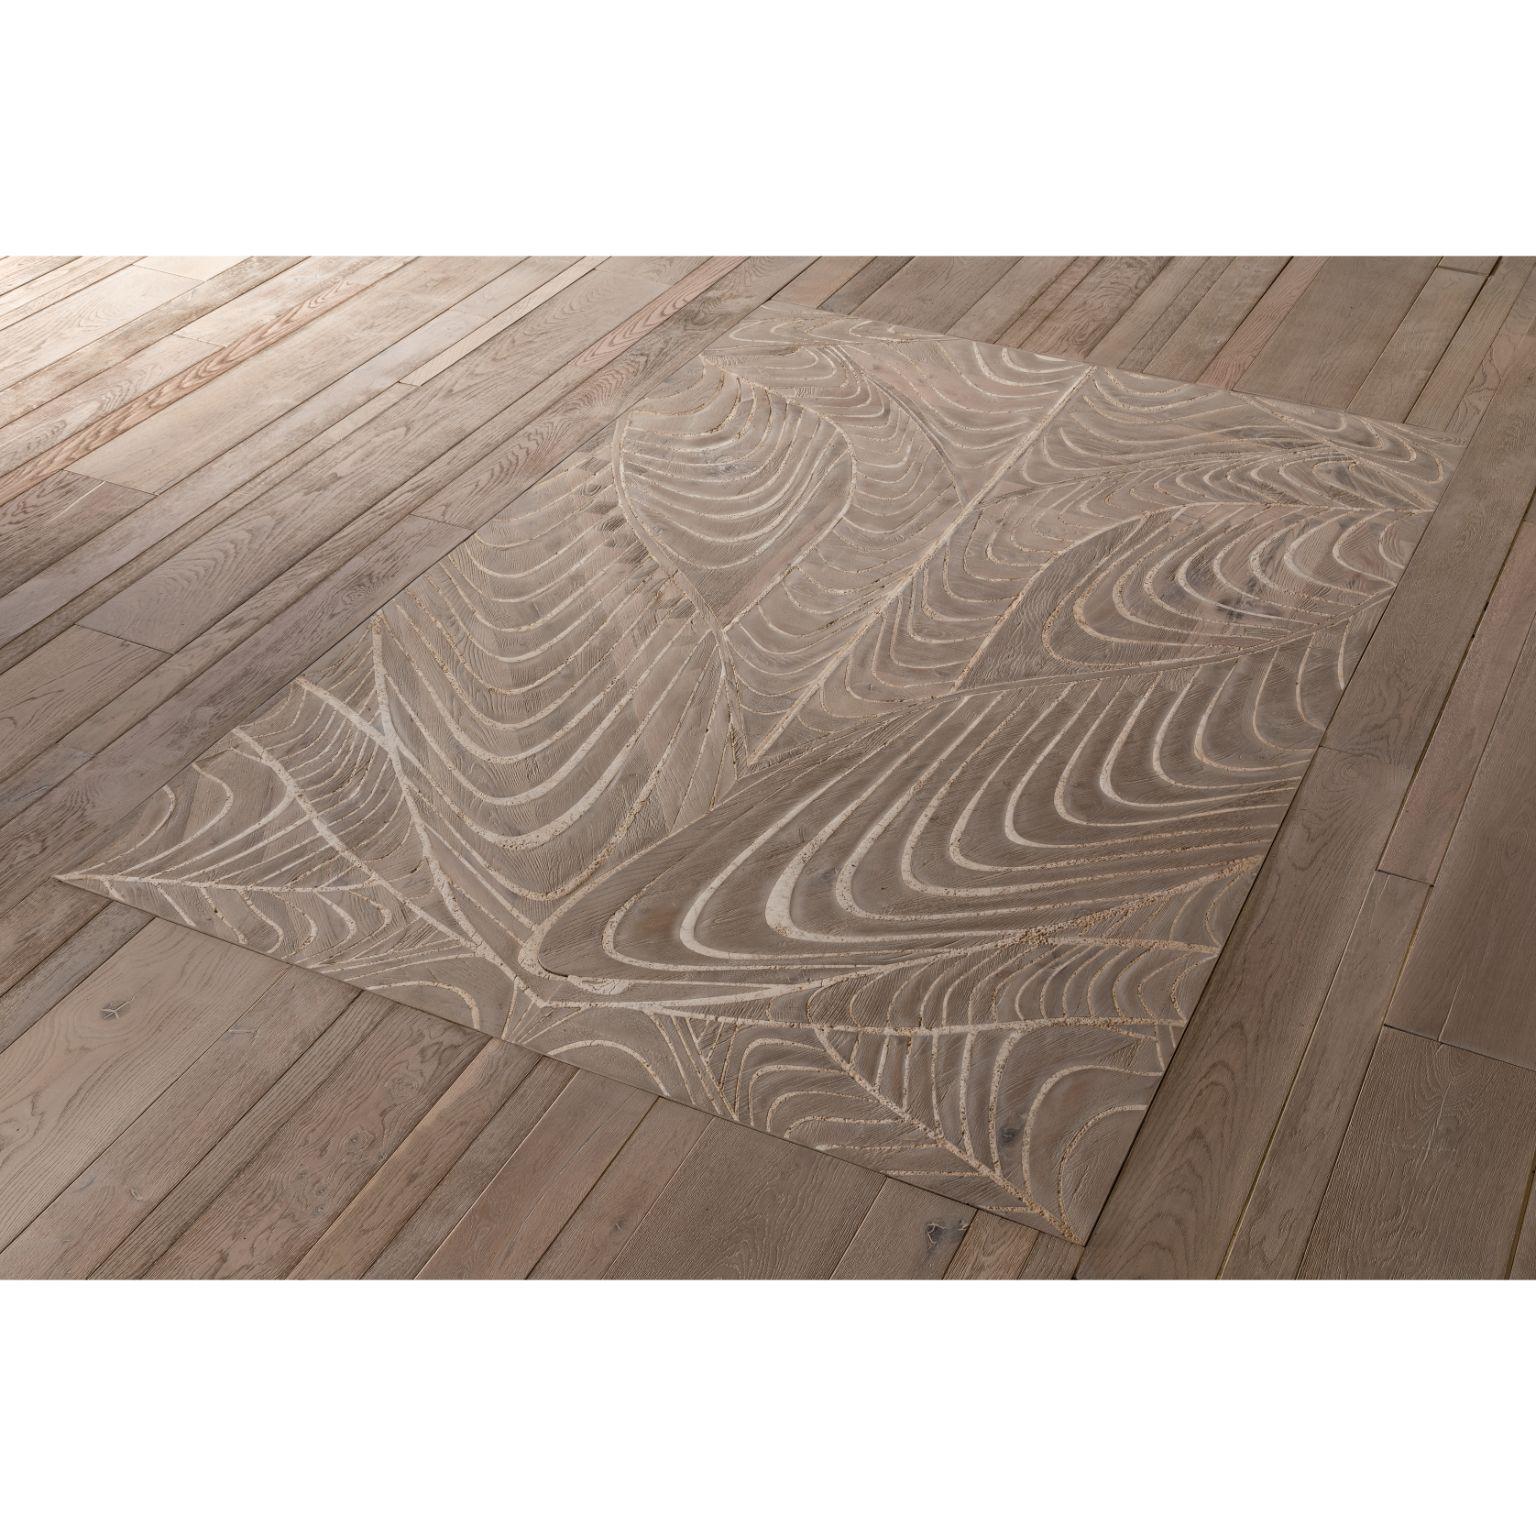 Foliage rug sculpted by Francesco Perini
Materials: Travertine on oak (composed by 2 pieces)
Dimensions: H 4 x W 200 x D 300 cm

Following a creative path that grew out of the founding of a company, I Vassalletti, known the world over for its